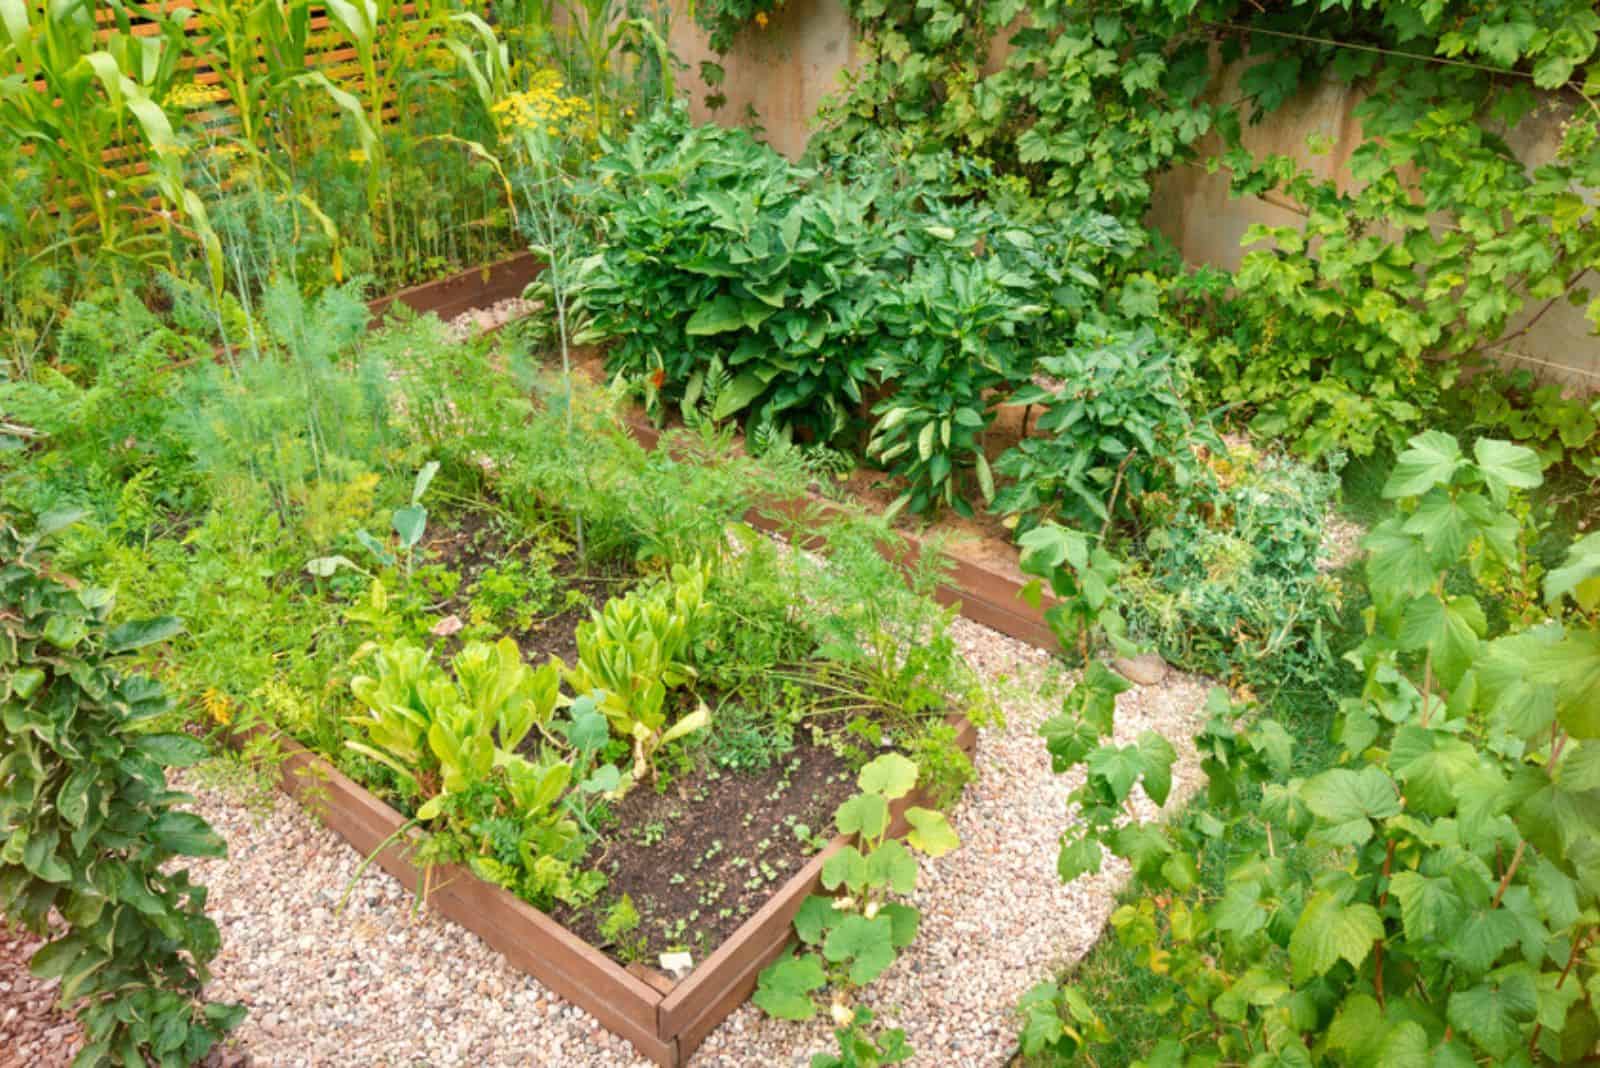 arden with raised wooden beds for growing organic vegetables 